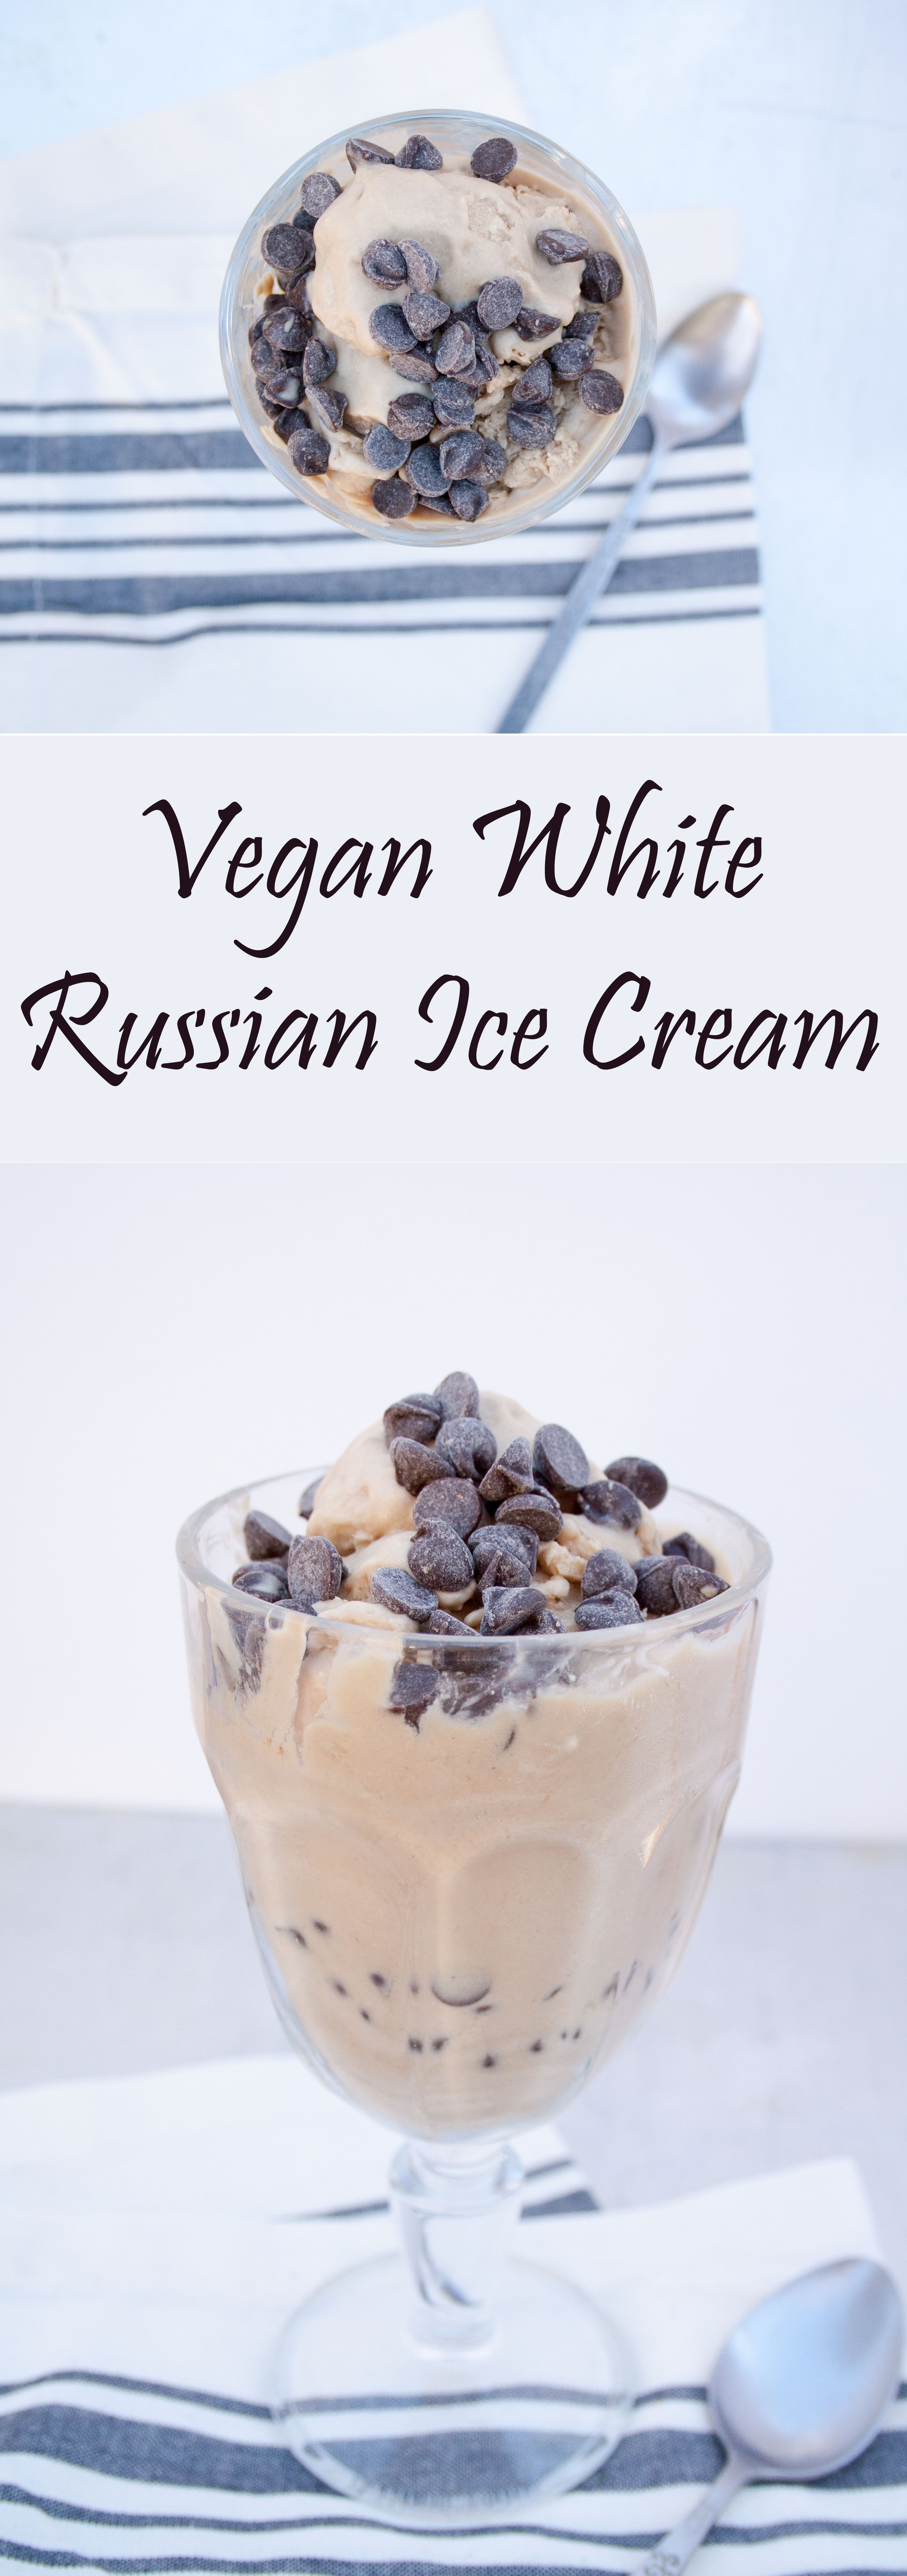 White Russian Ice Cream Recipe collage photo with text.